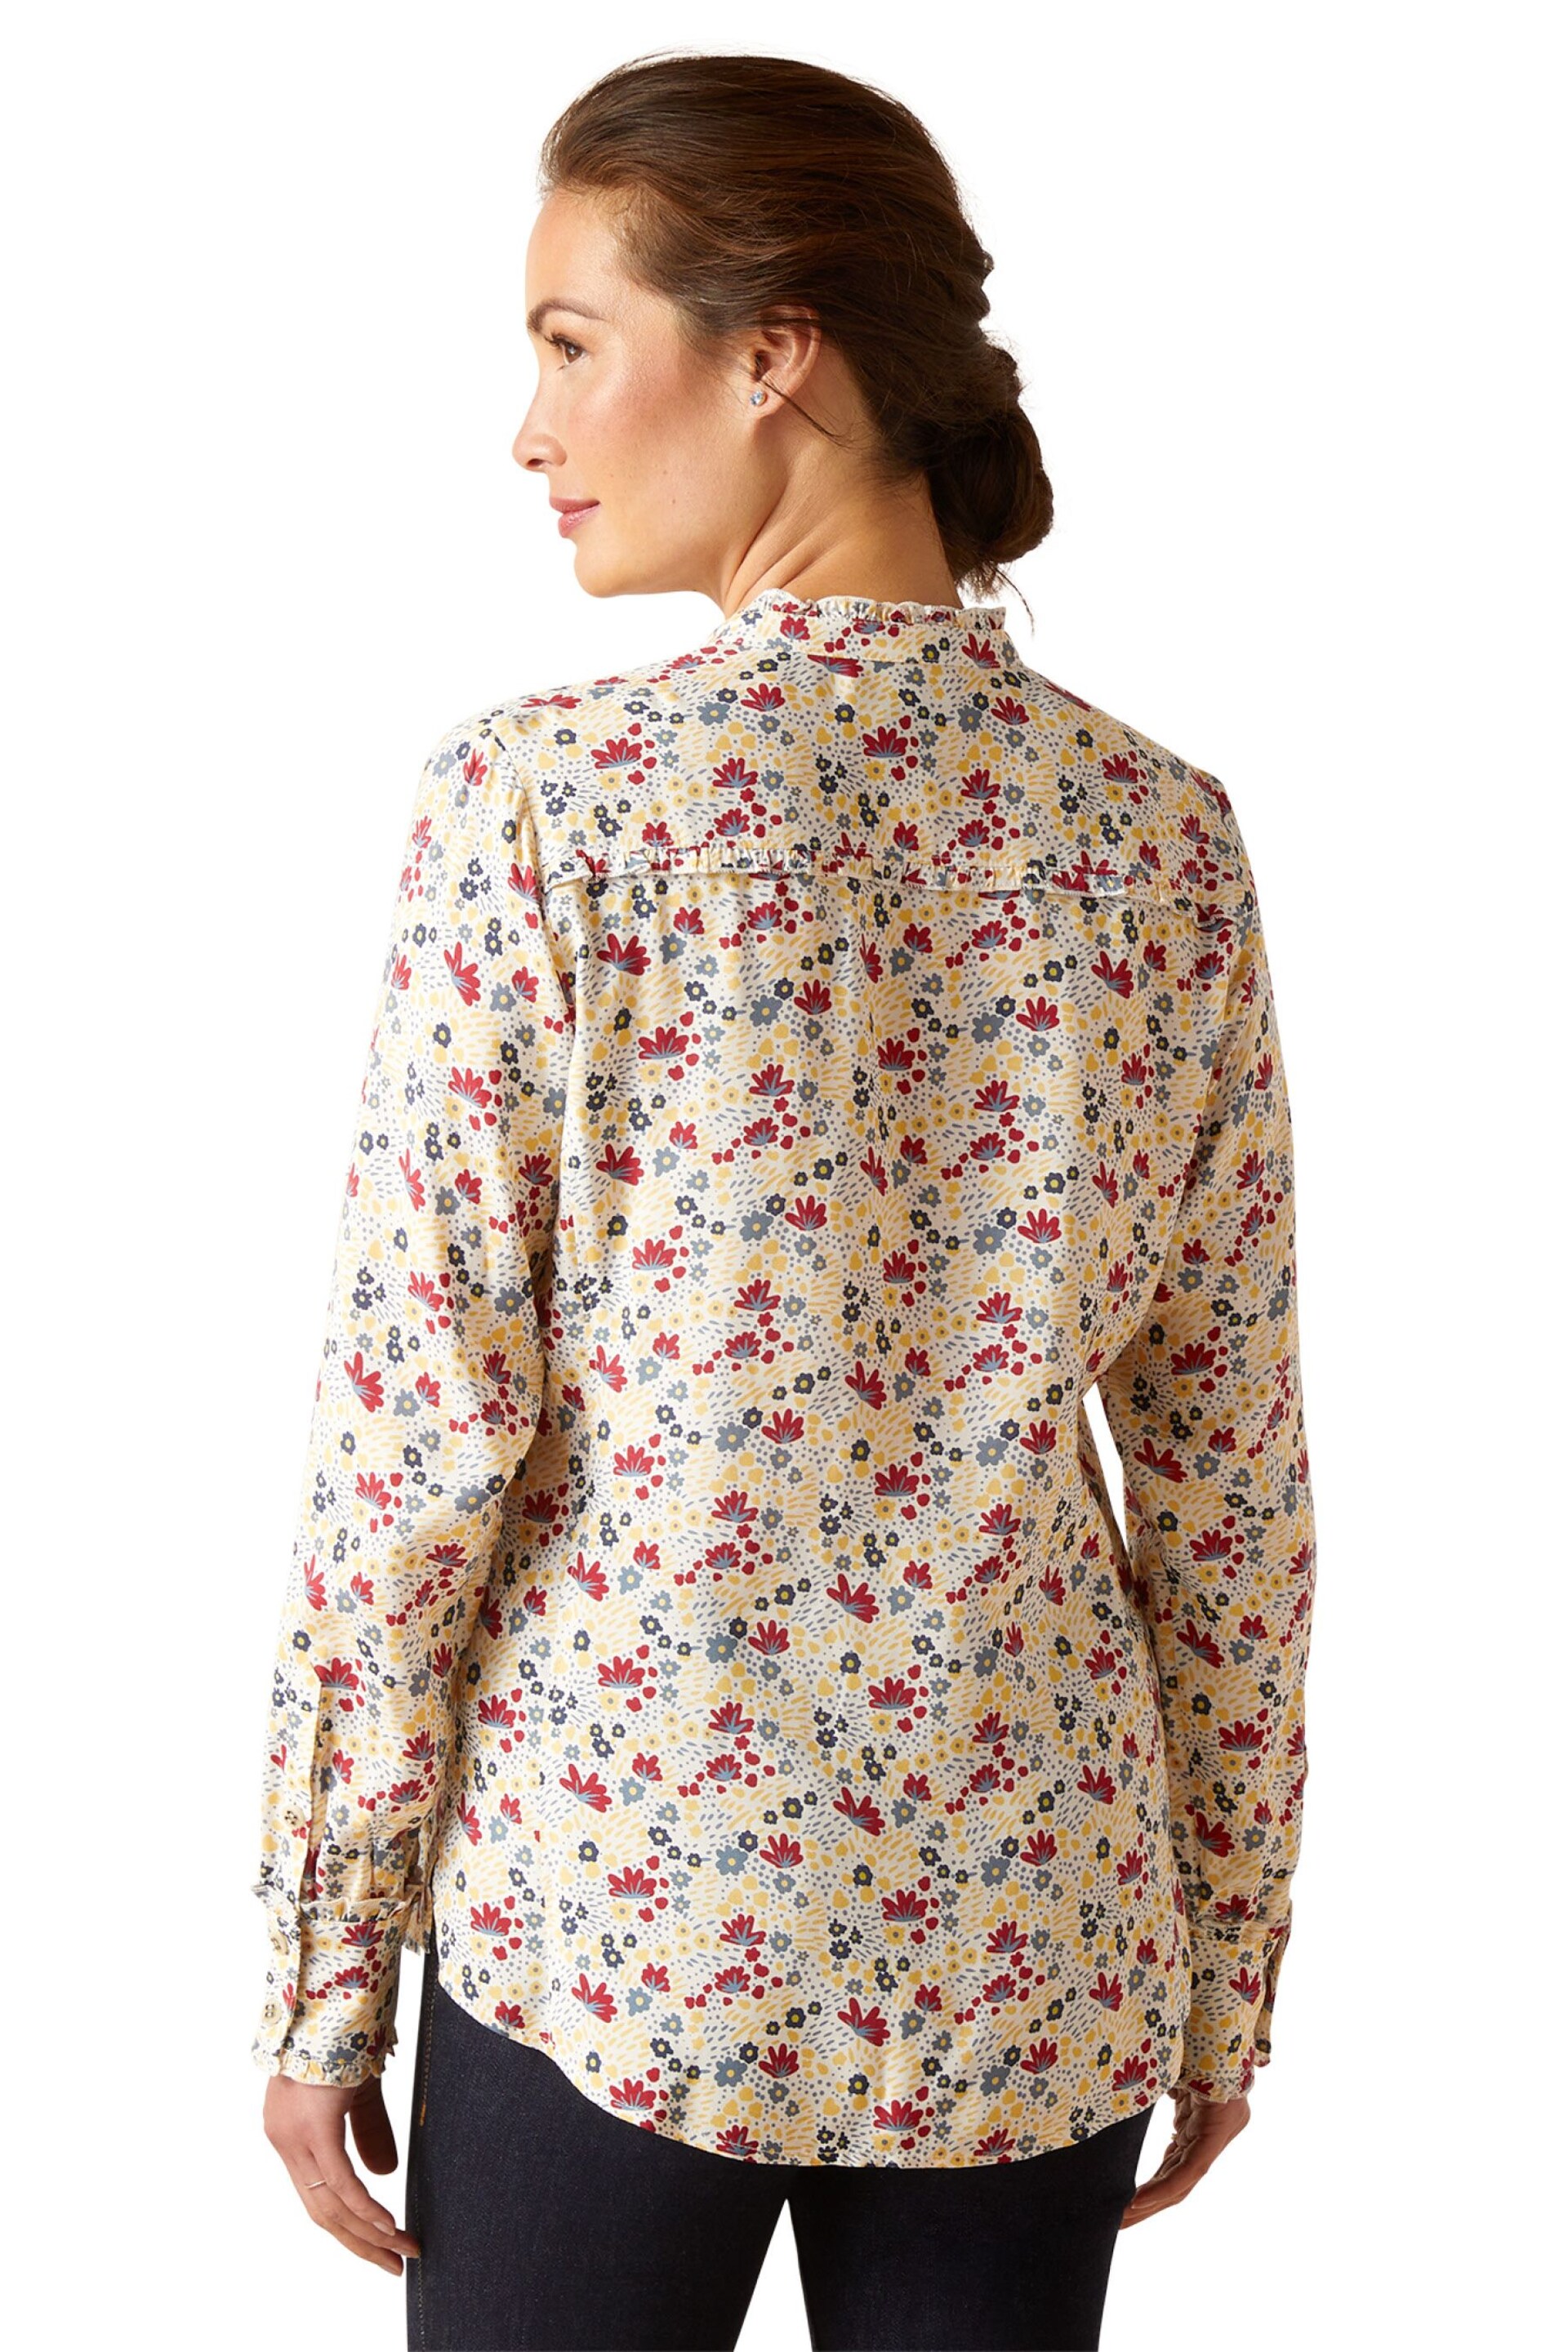 Ariat Clarion Floral White Blouse - Image 3 of 4